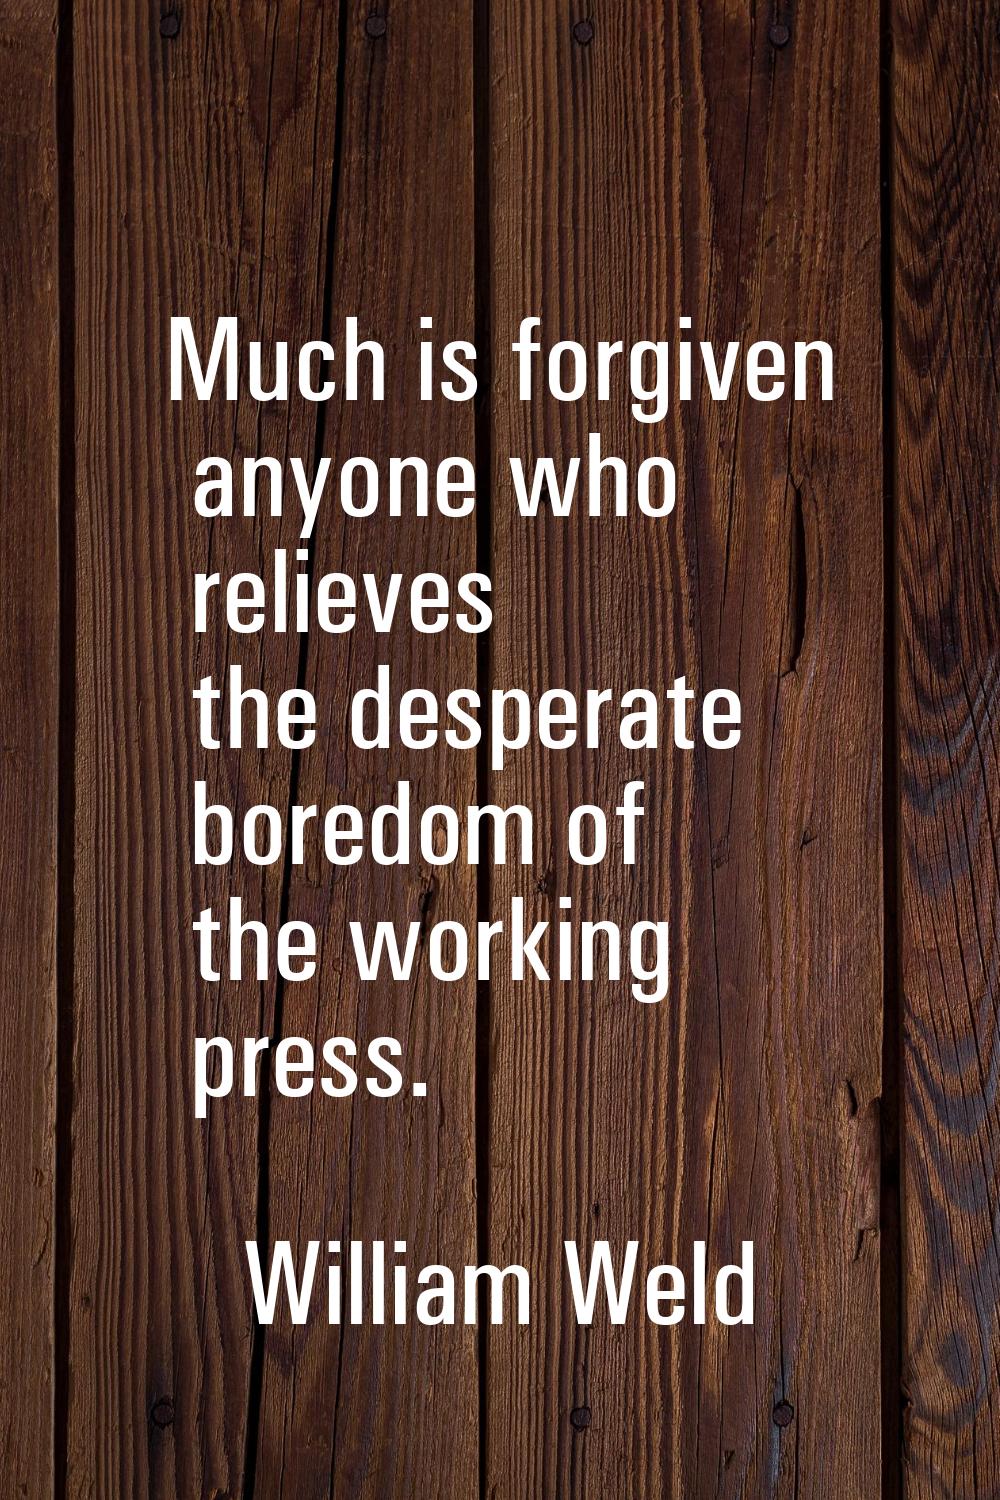 Much is forgiven anyone who relieves the desperate boredom of the working press.